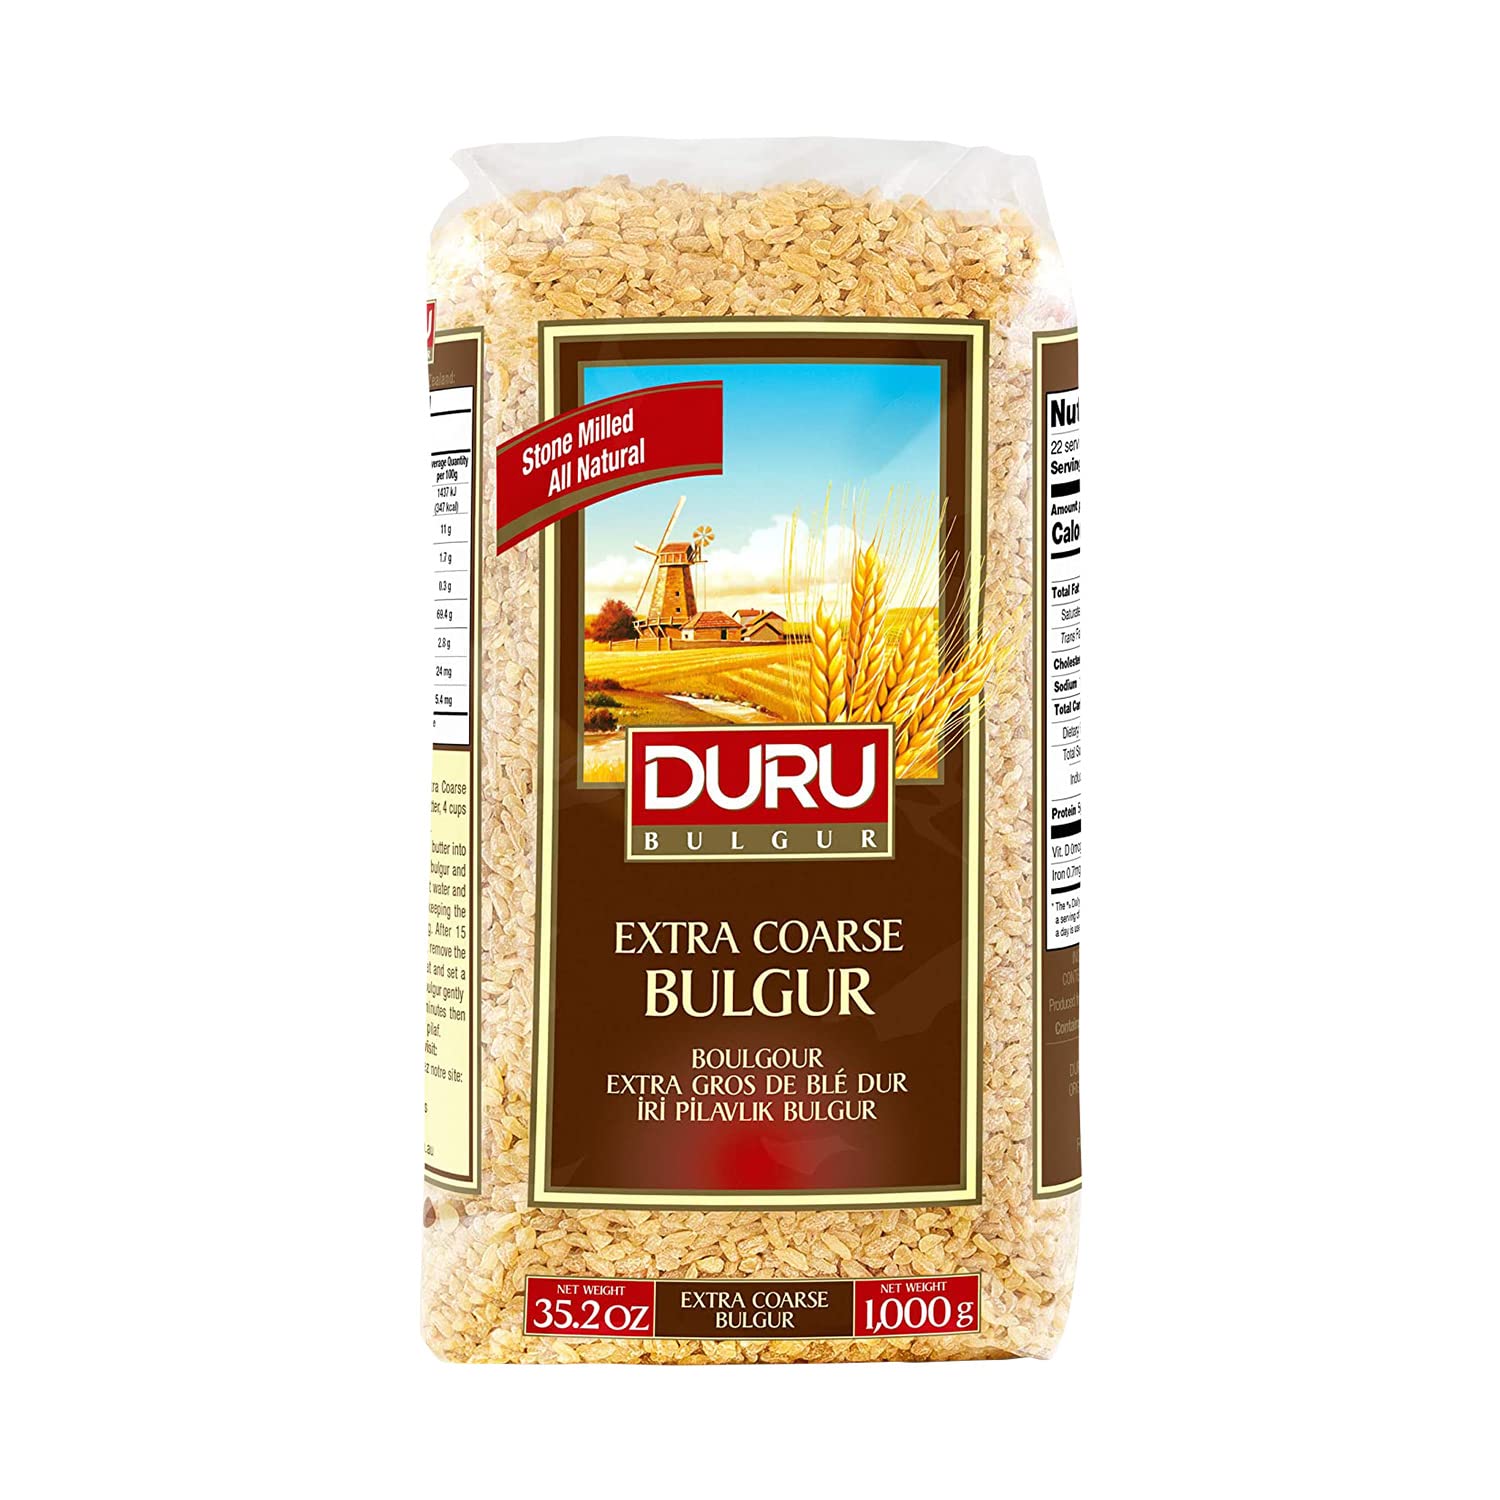 Duru Extra Coarse Bulgur, 35.2oz (1000g), Wheat Berries, 100% Natural and Certificated, High Fiber and Protein, Non-GMO, Great for Vegan Recipes, Better than Rice